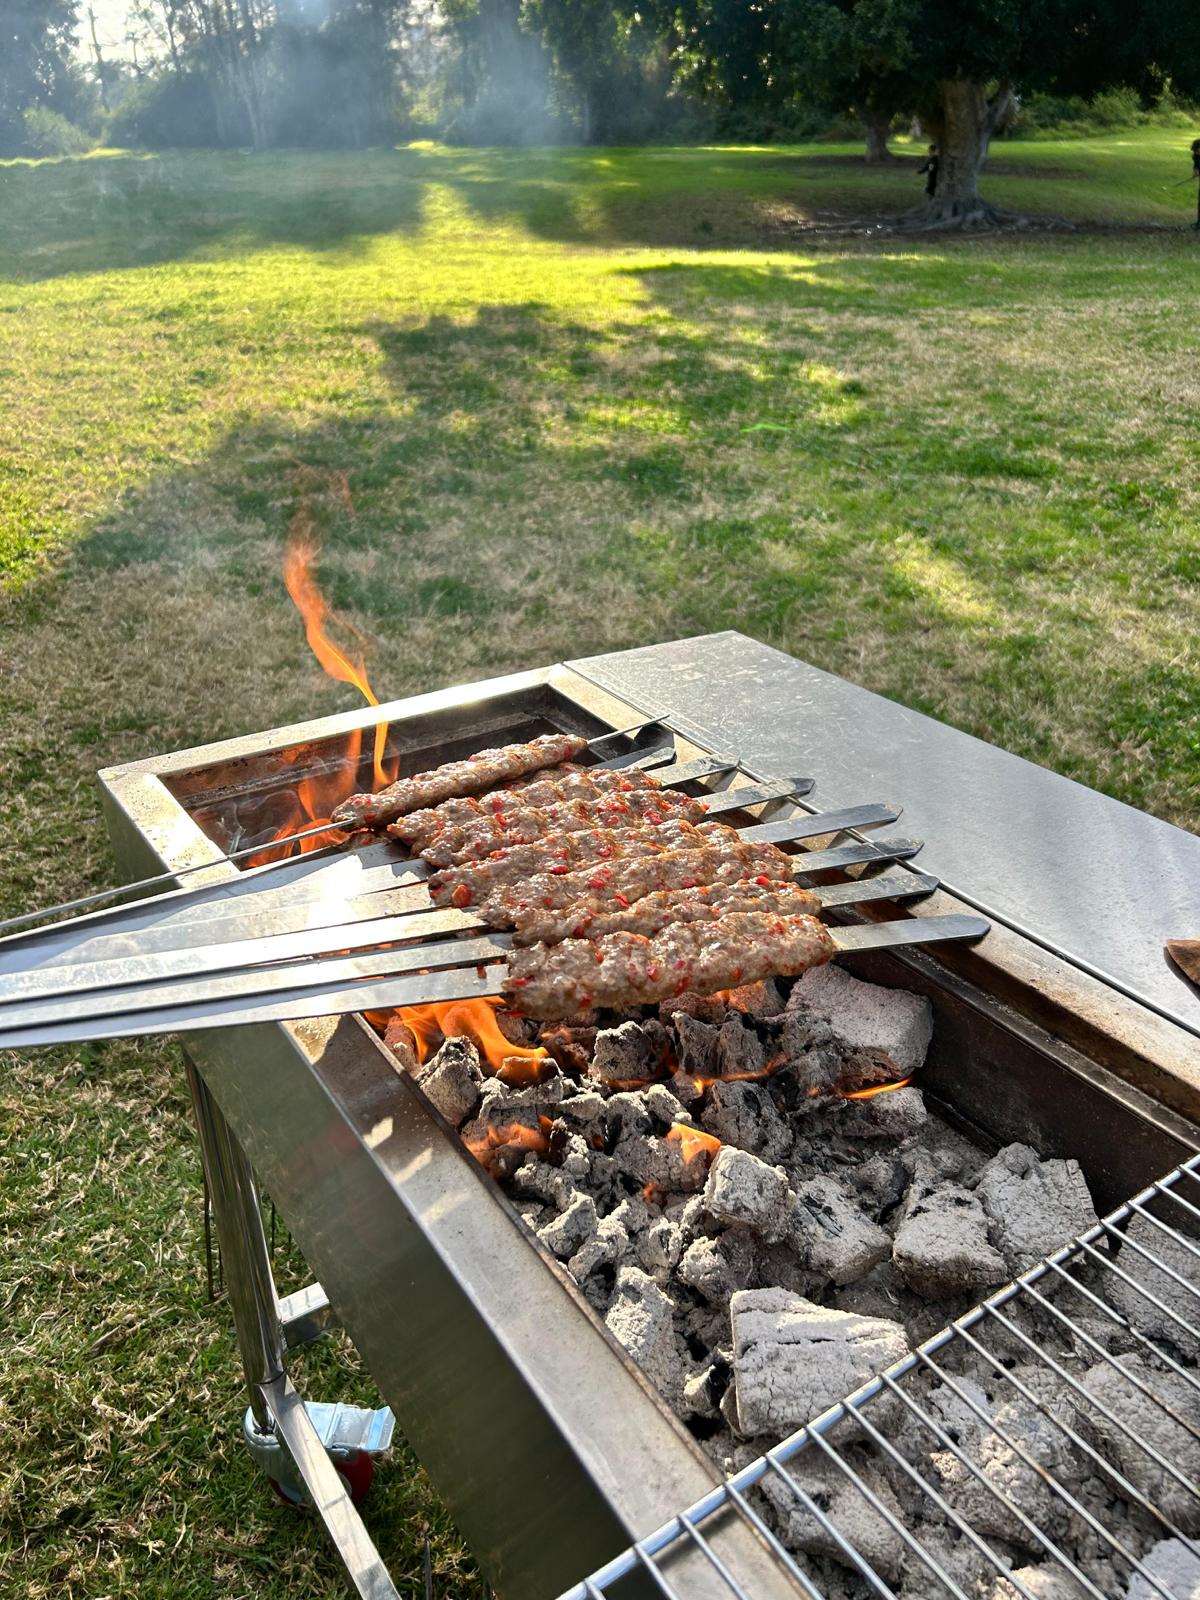 adana skewers cooking on portable charcoal bbq